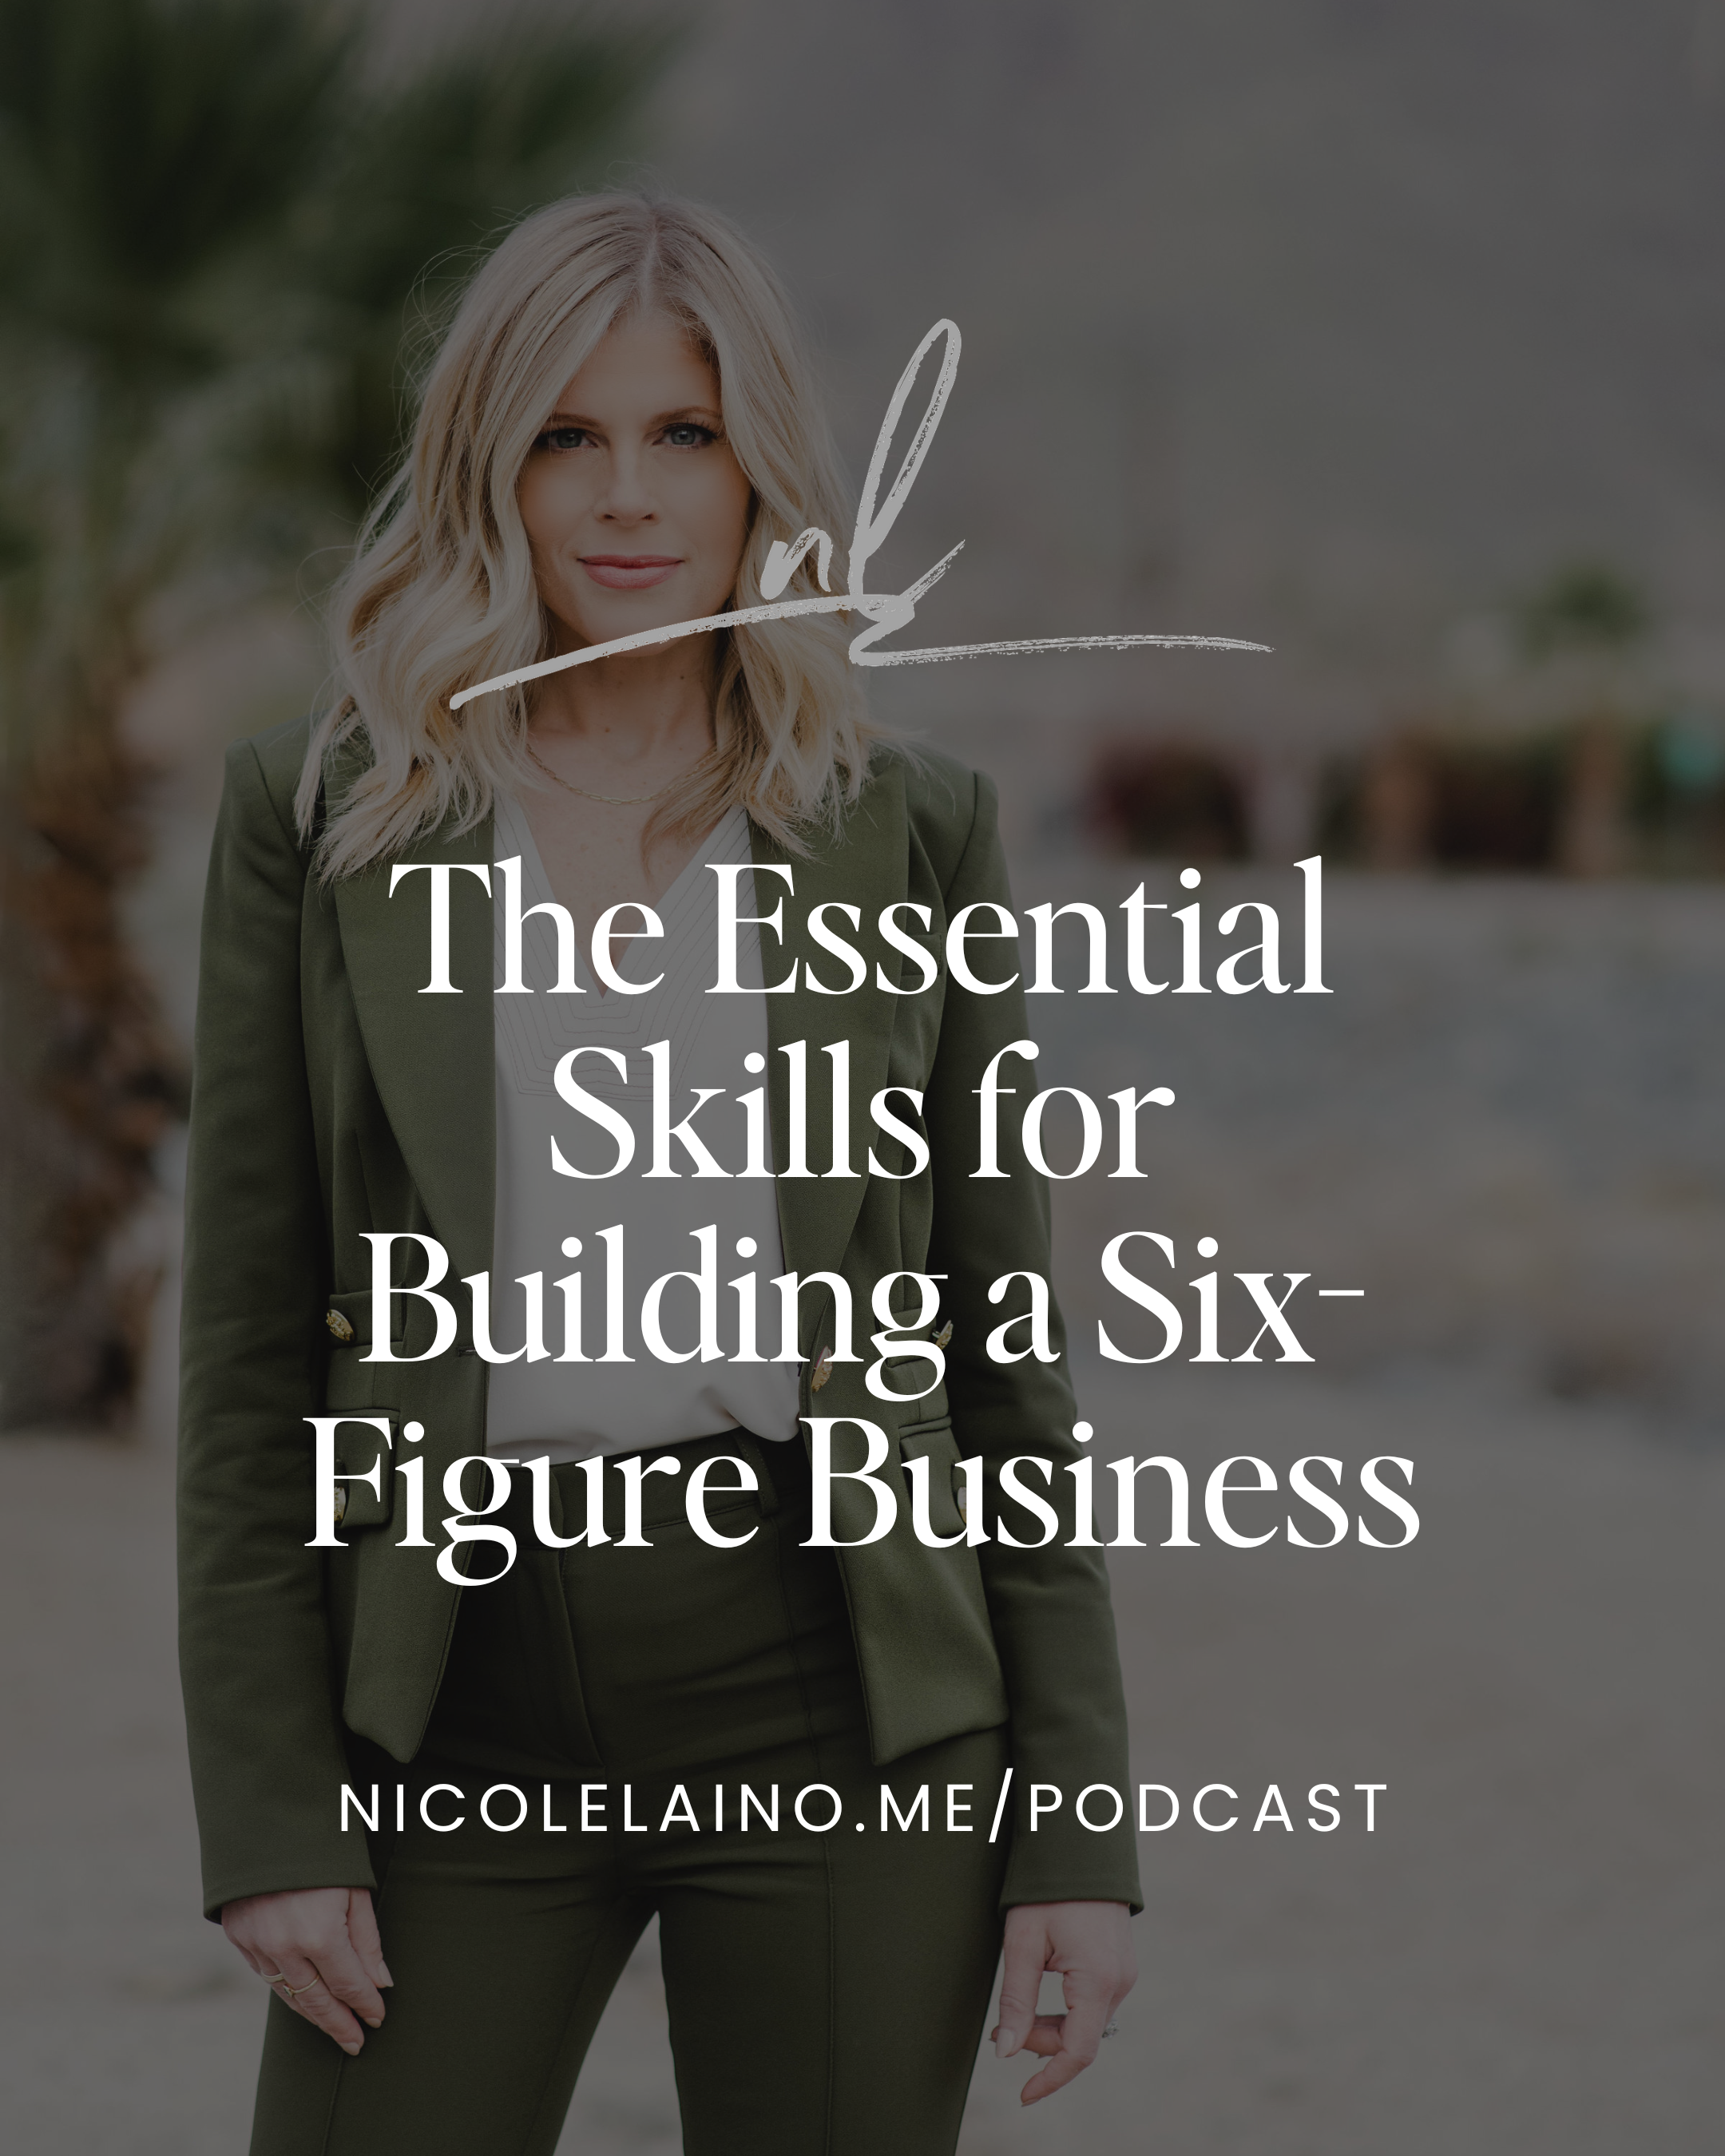 The Essential Skills for Building a Six-Figure Business